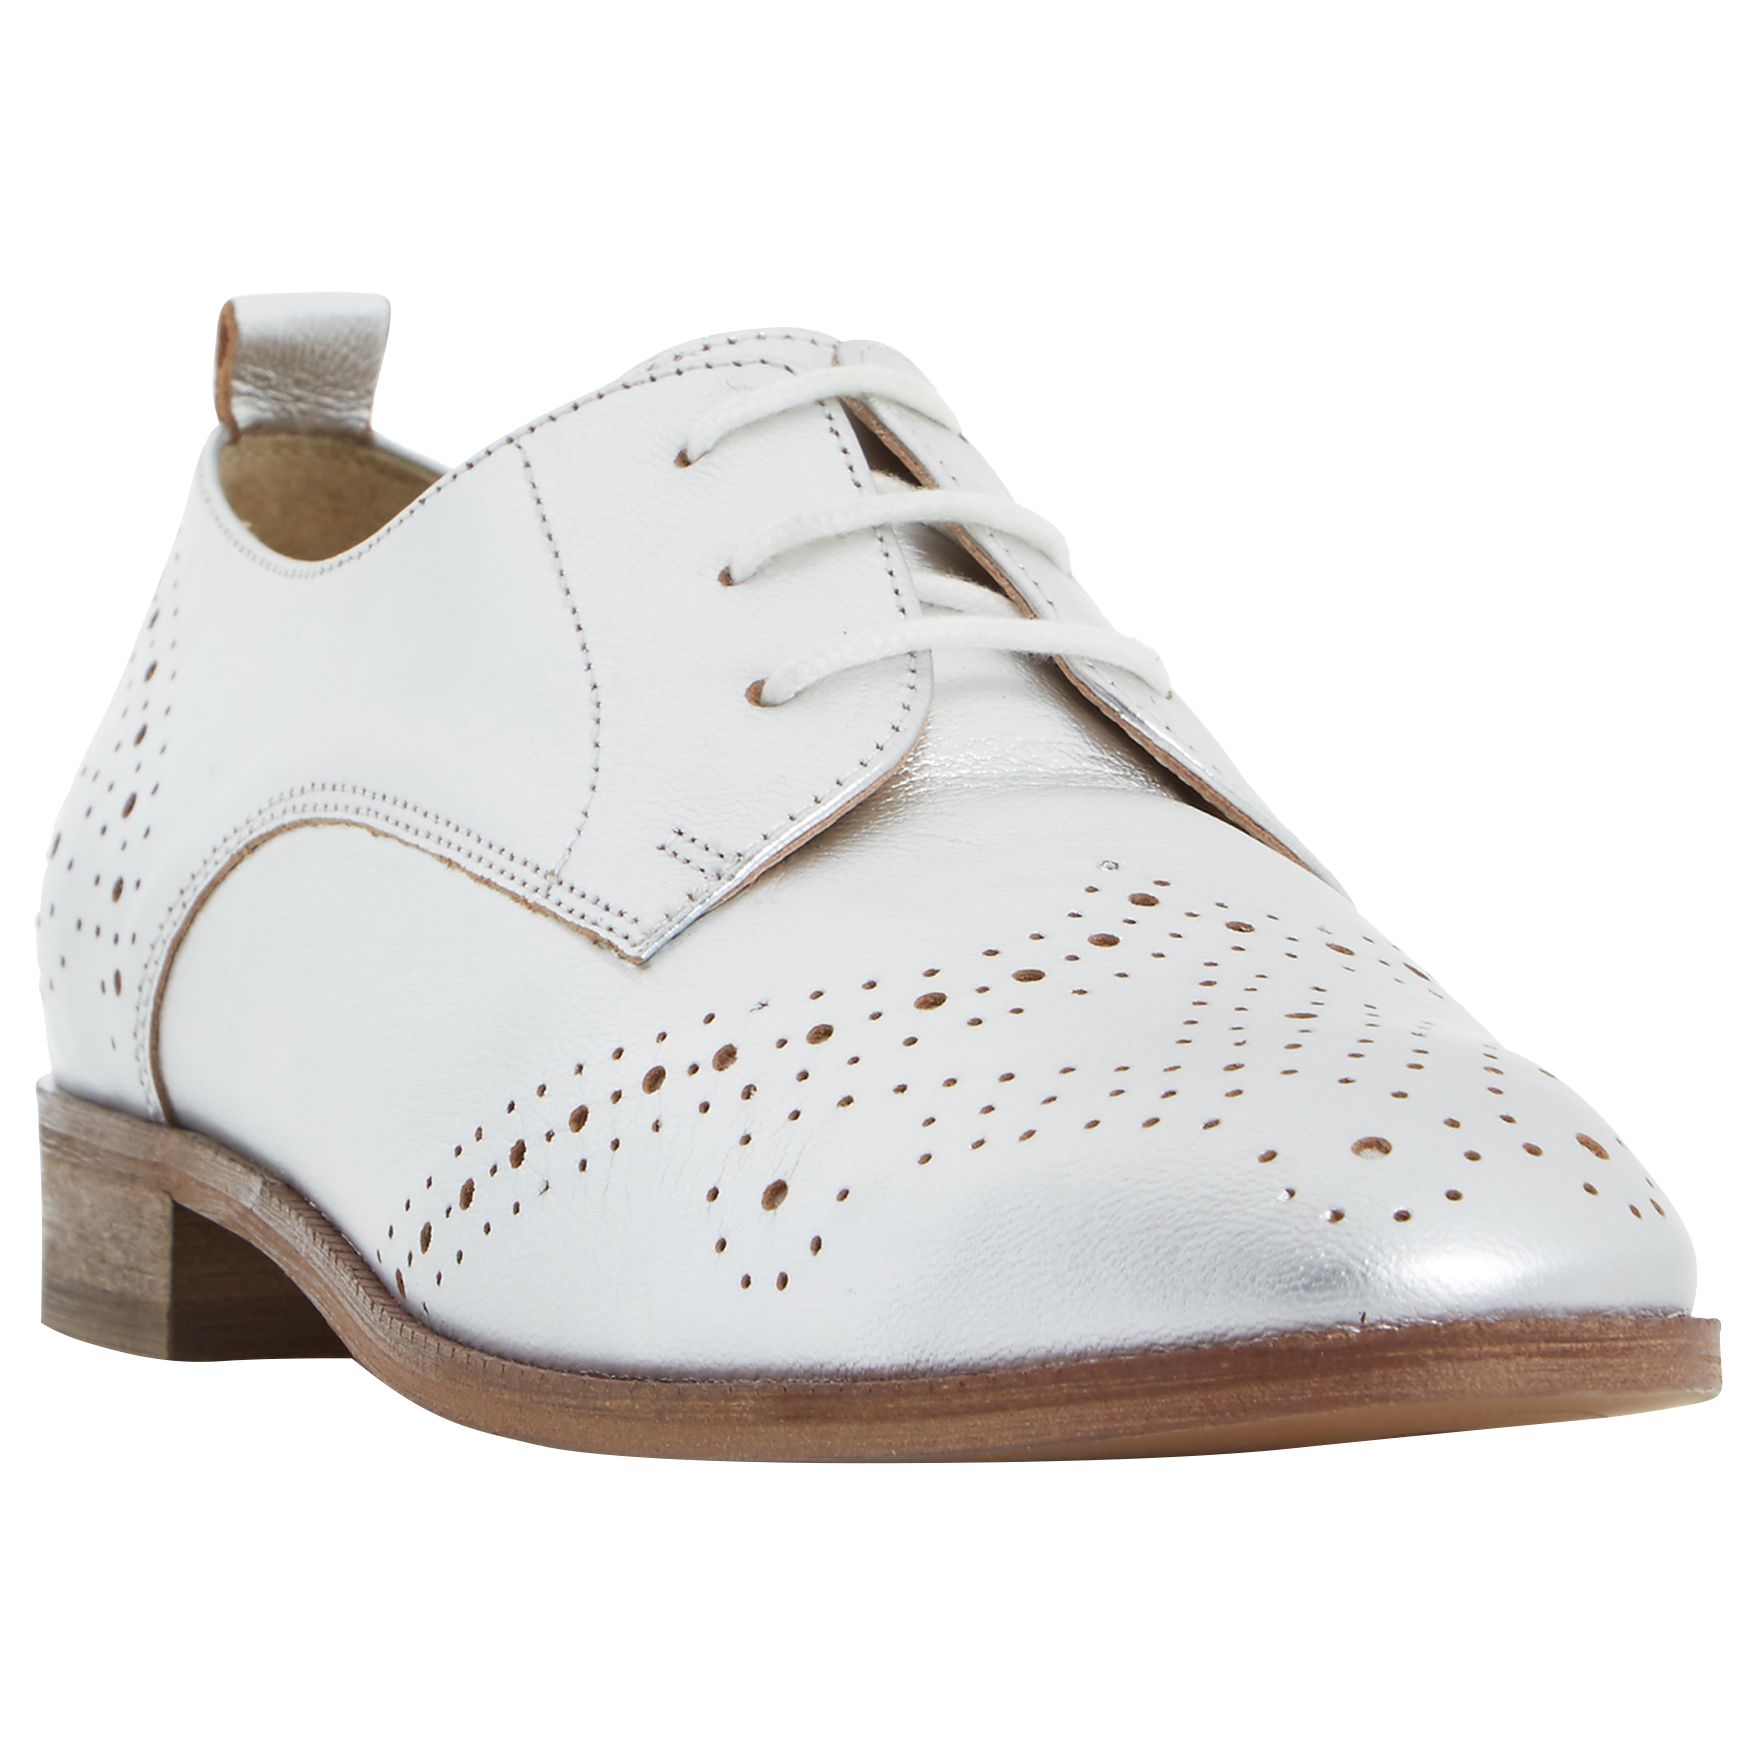 Dune Foster Lace Up Leather Brogues, Silver, 6